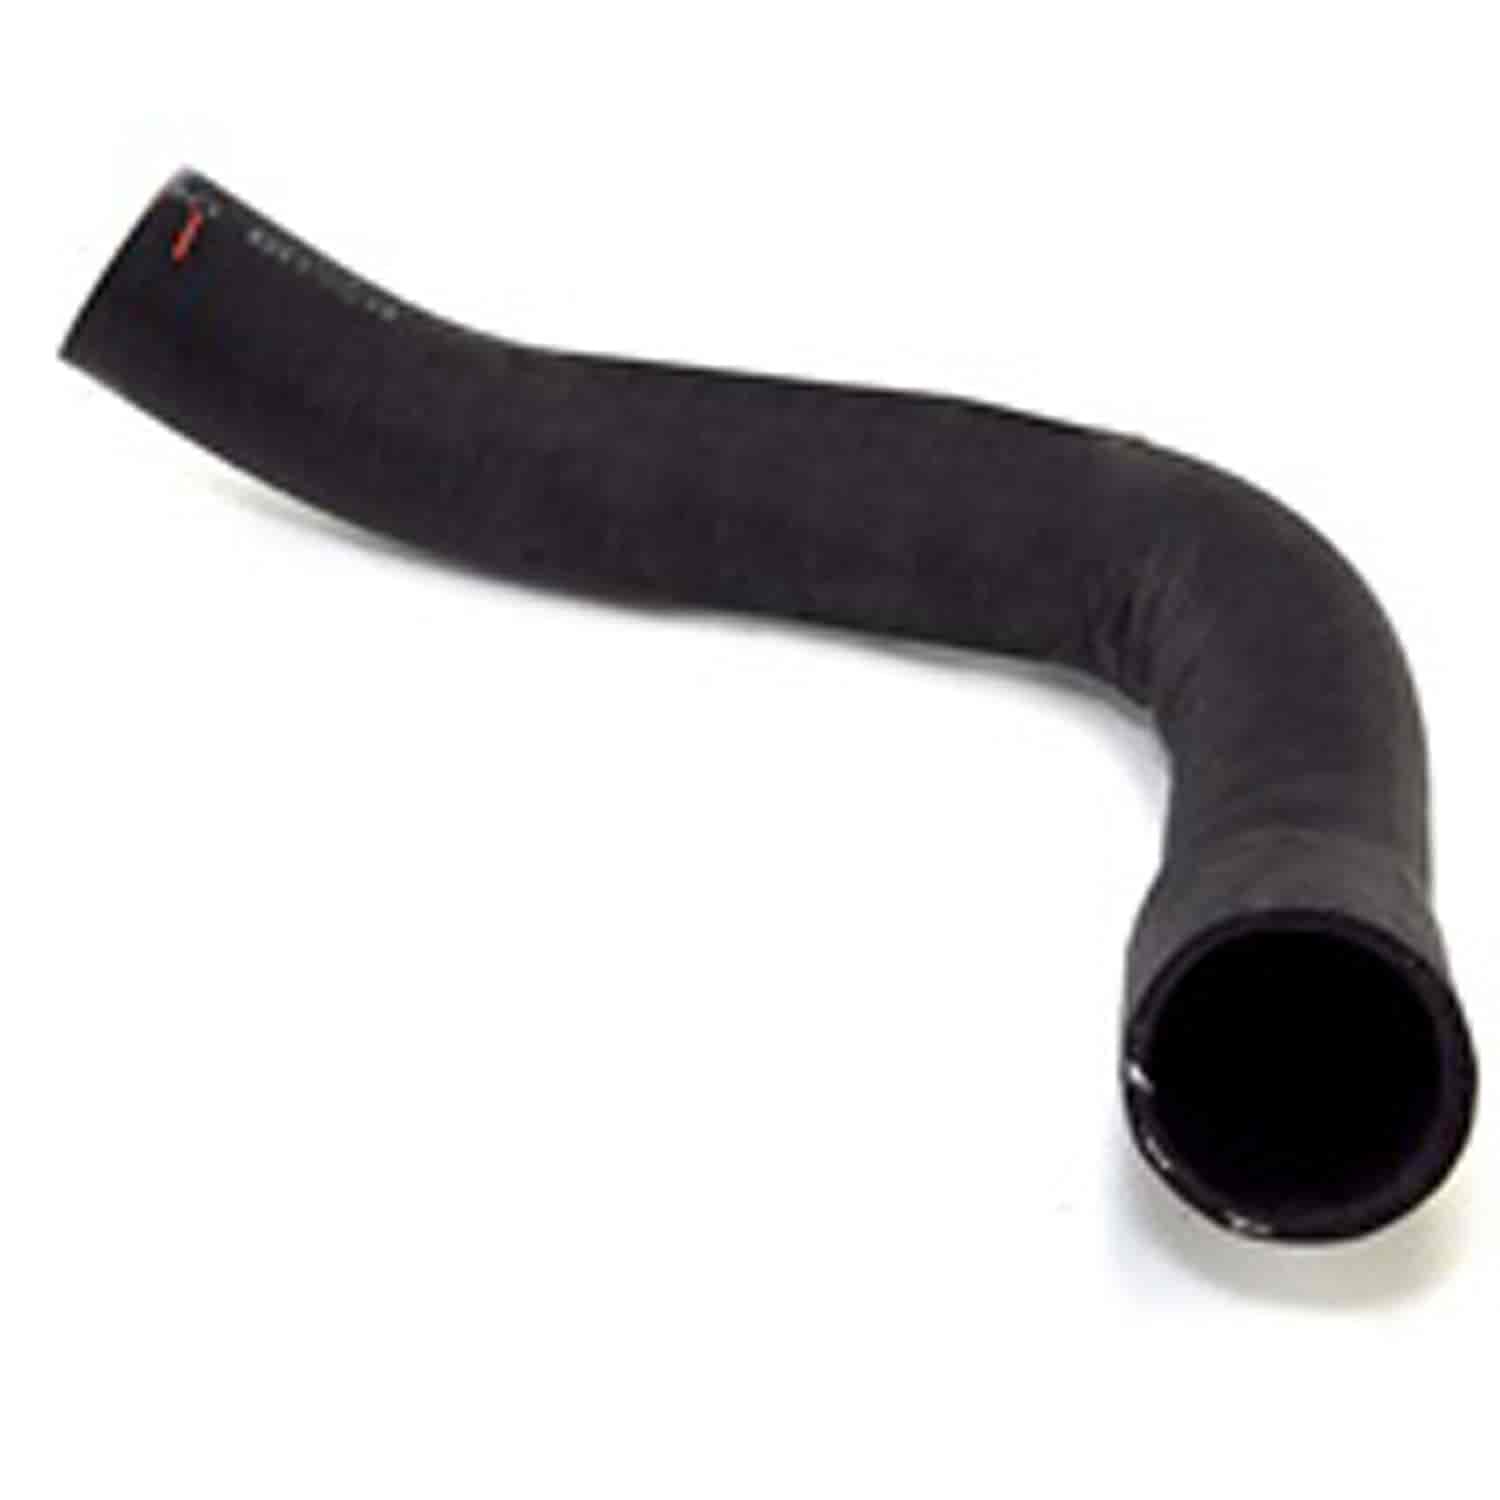 Stock replacement upper radiator hose from Omix-ADA, Fits 08-11 Jeep Liberty KK s with a 3.7 liter engine.